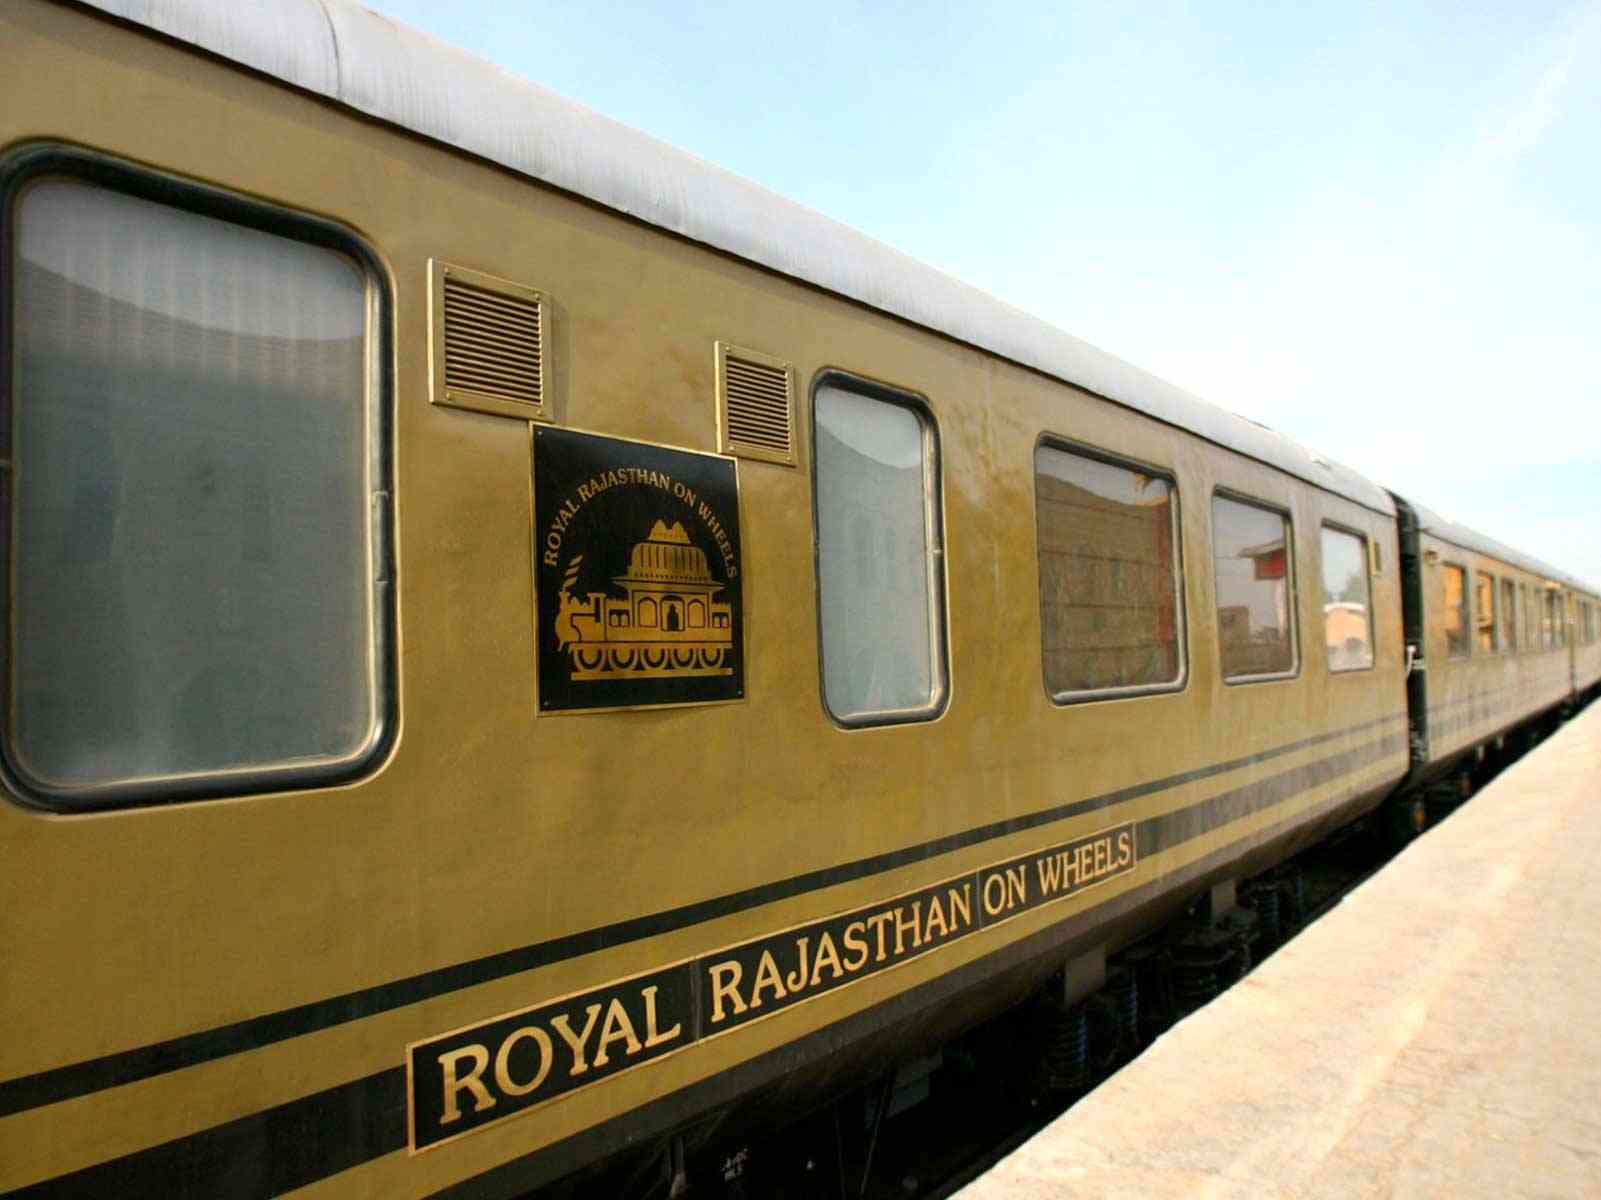 top 5 most luxurious trains in india, royal rajasthan on wheels fare , royal rajasthan on wheels route , royal rajasthan on wheels train ticket price in indian rupees , royal rajasthan on wheels review , itinerary of royal rajasthan on wheels , royal rajasthan on wheels train number , royal rajasthan on wheels train no , rajasthan royal train photos